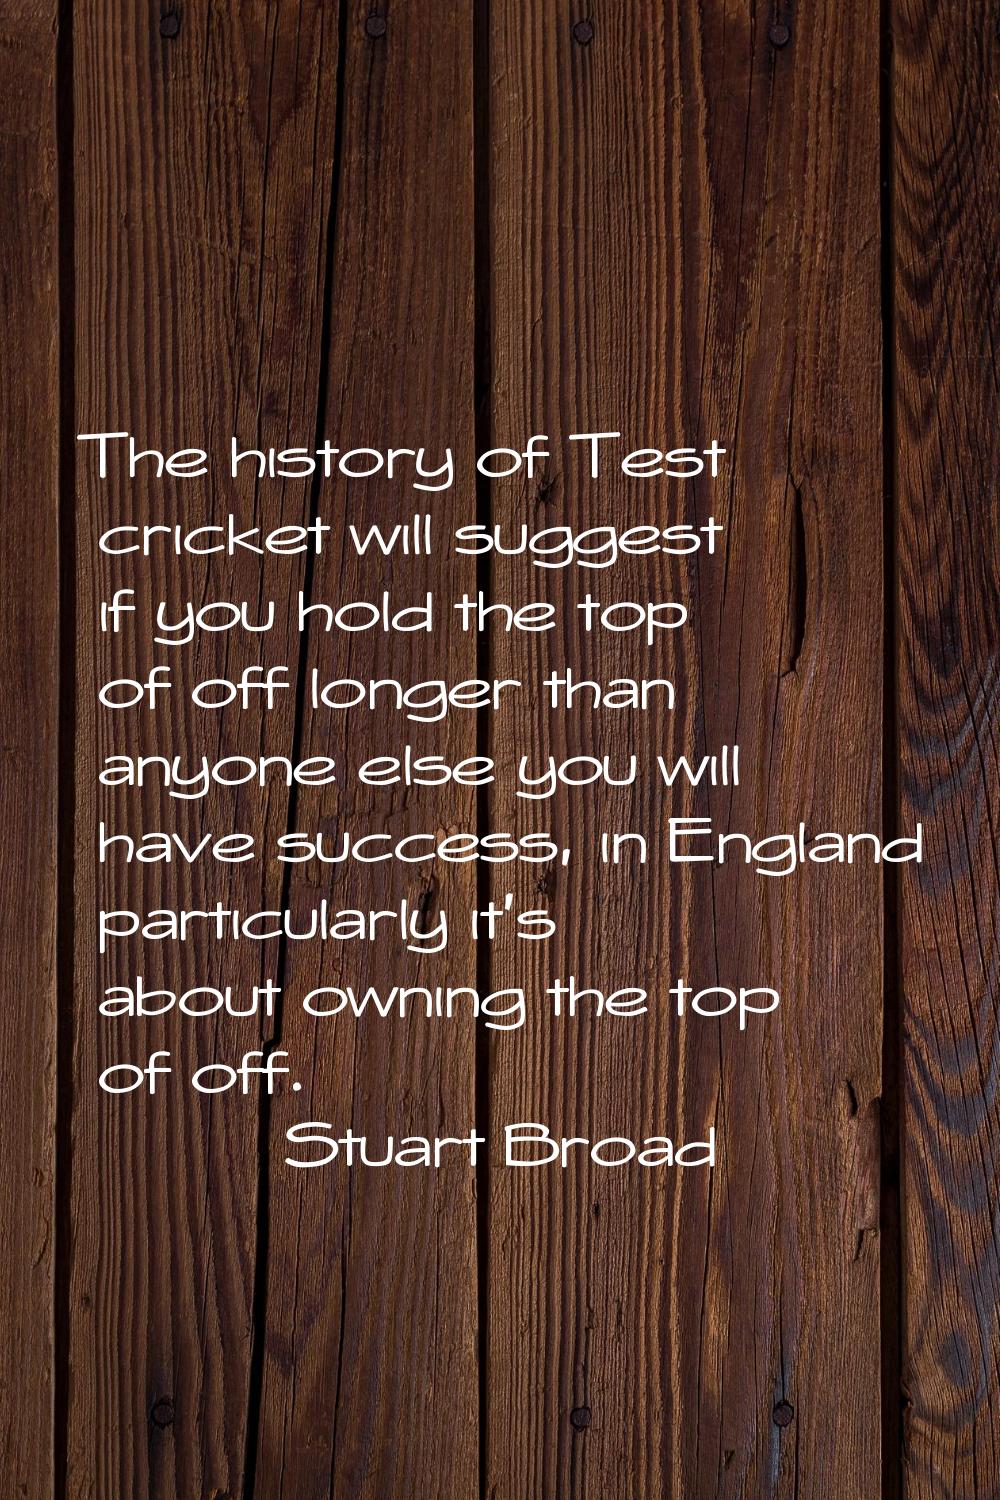 The history of Test cricket will suggest if you hold the top of off longer than anyone else you wil